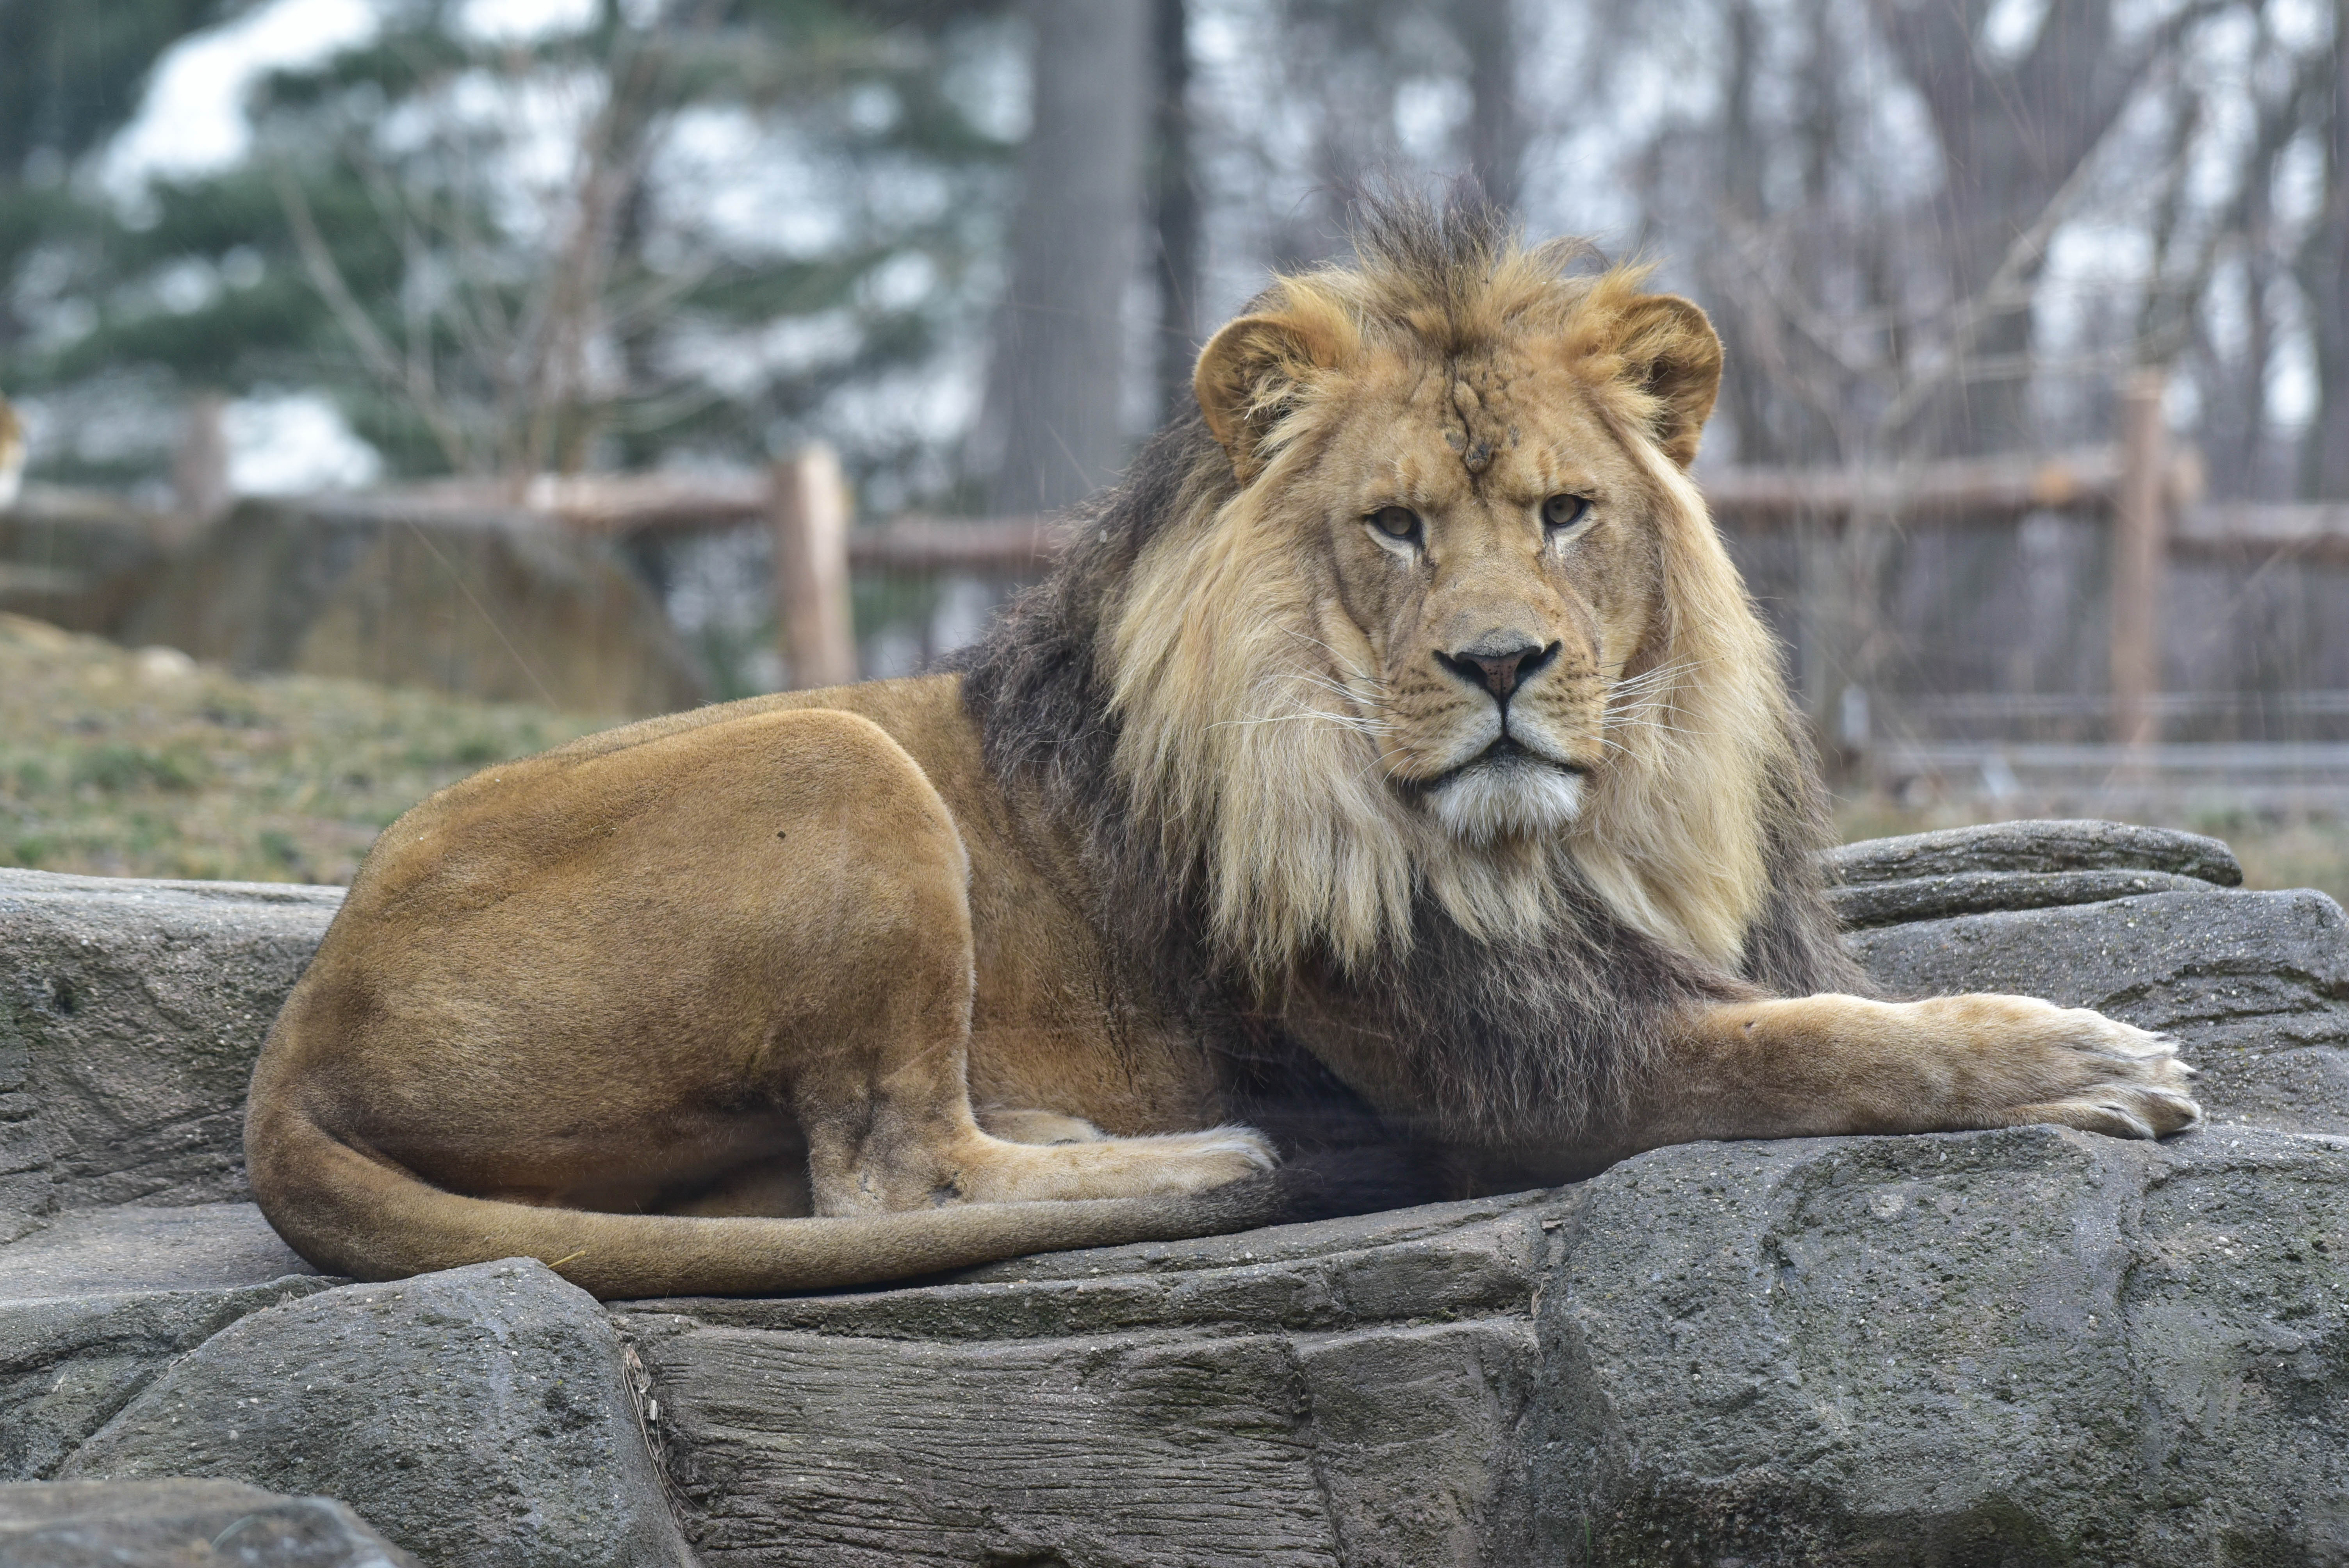 Maryland Zoo Lion Pride to Temporarily Move